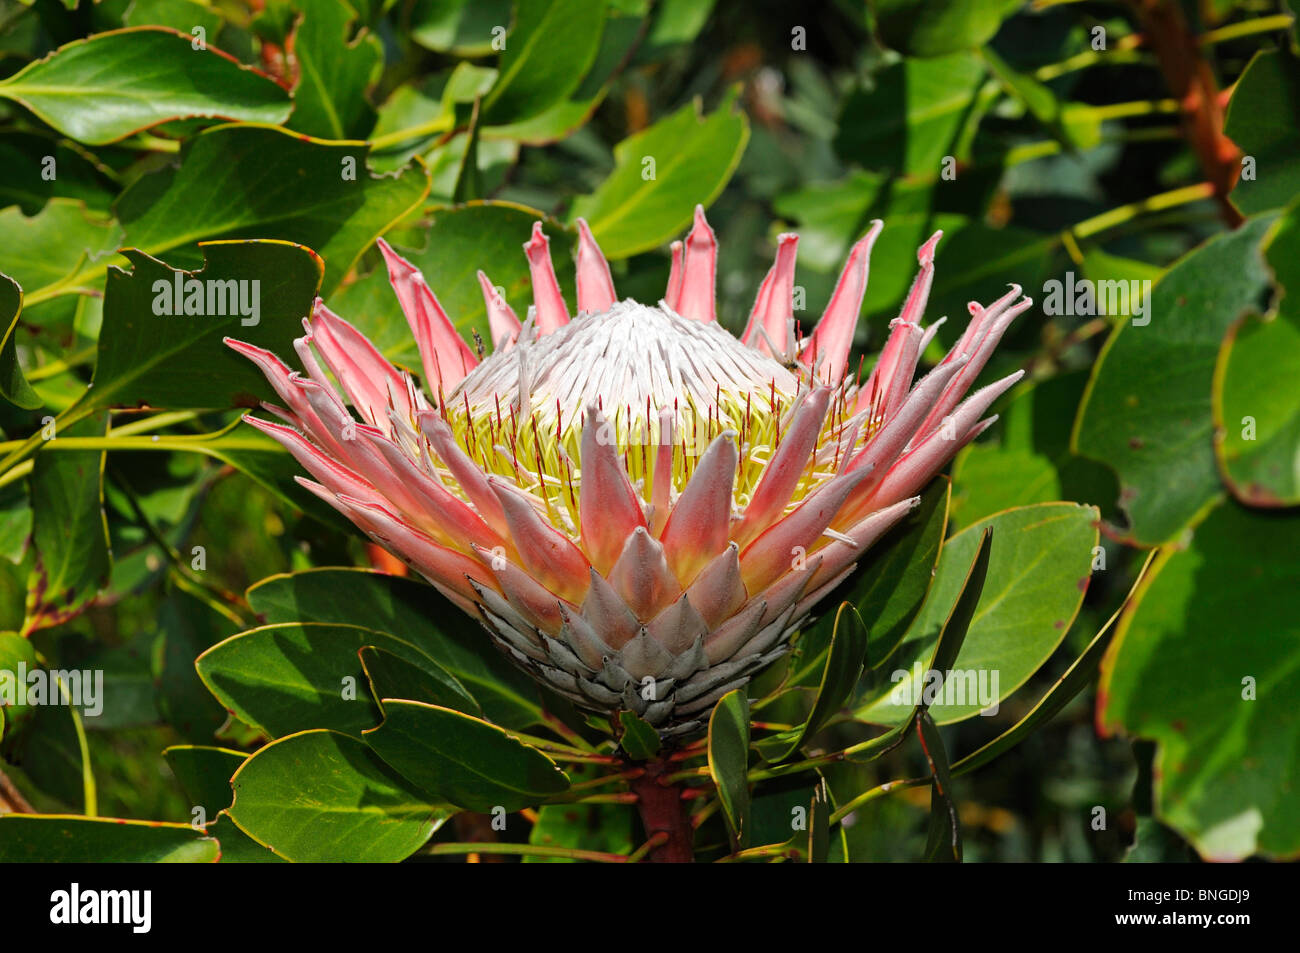 King Protea, Protea cynaroides, National flower of South Africa, Cape Floral Kingdom, South Africa Stock Photo